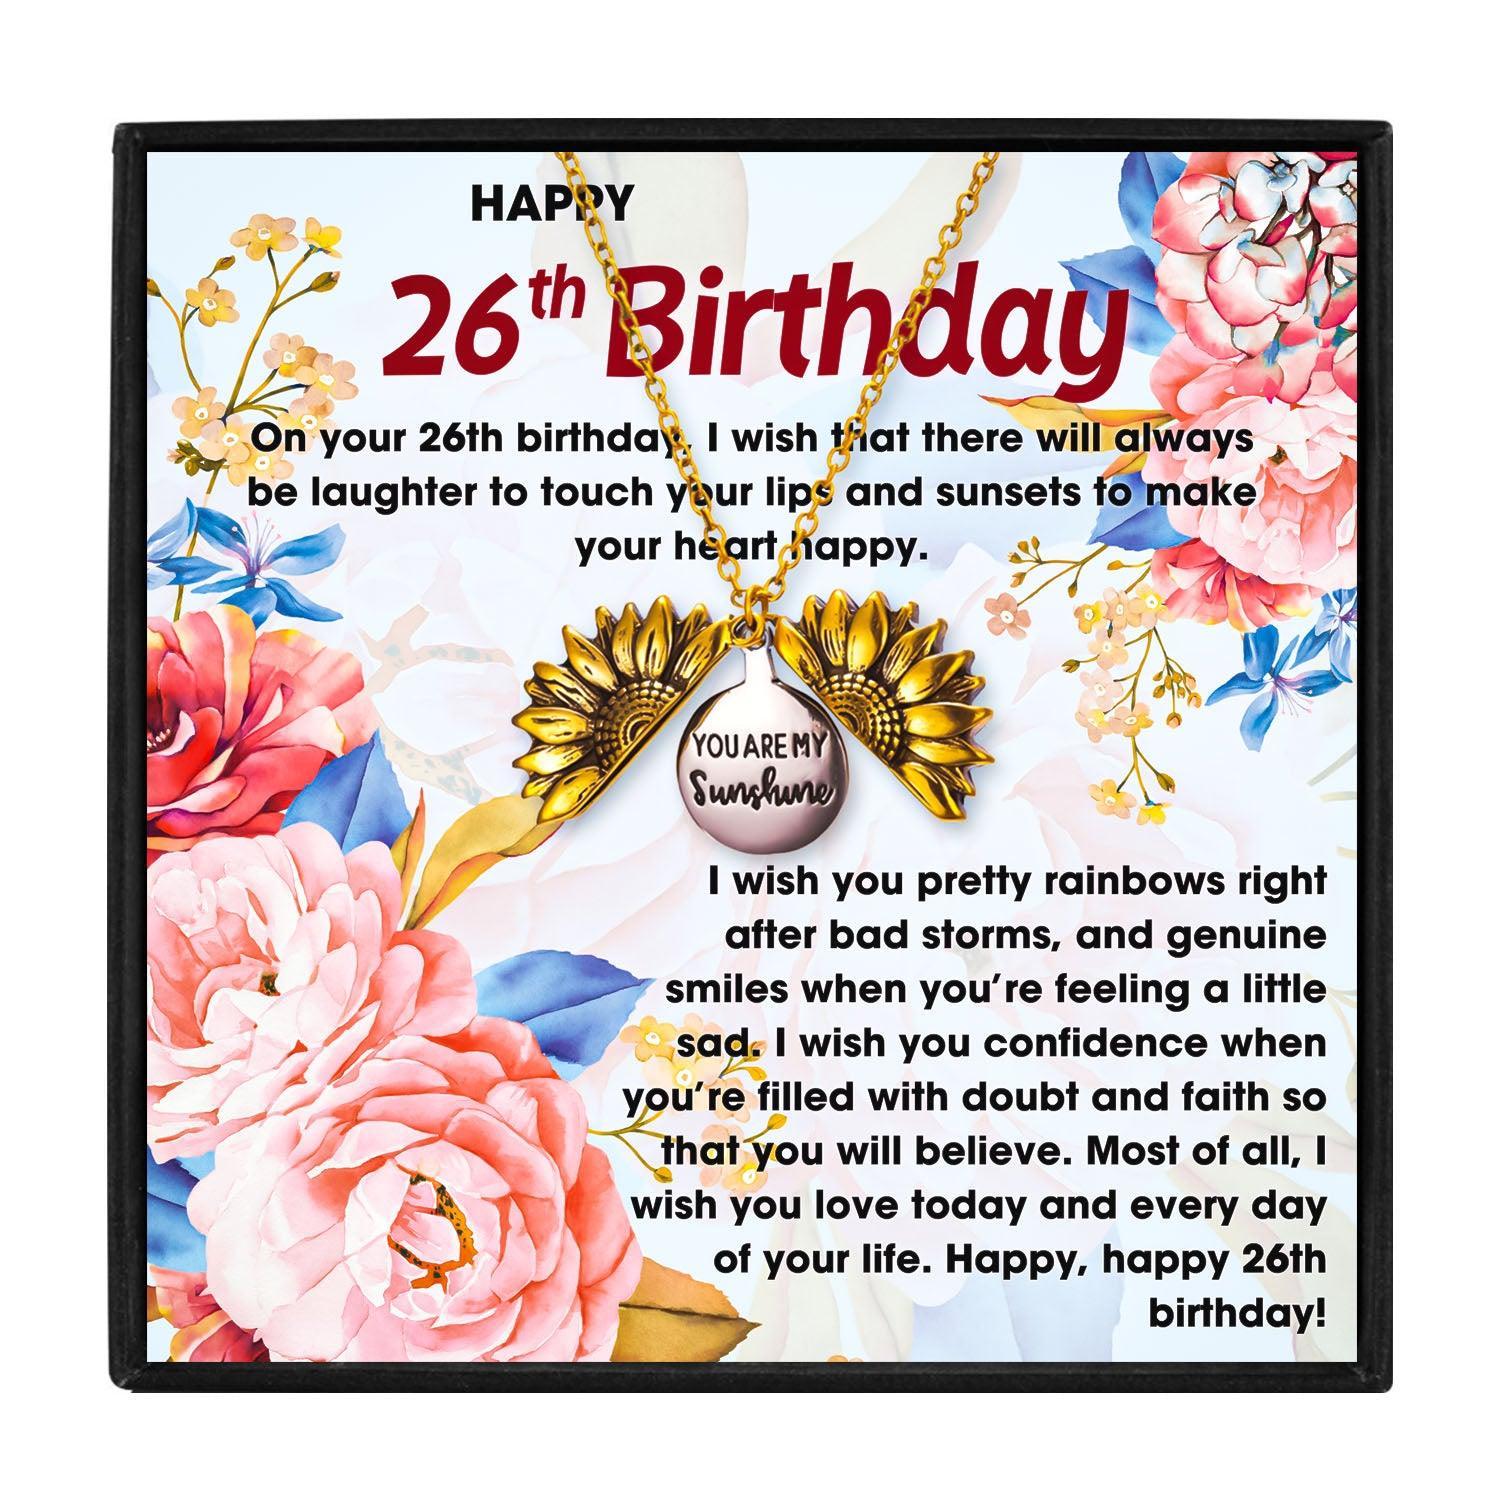 26th Birthday Gifts and Ideas for Girls and Women in 2023 | 26th Birthday Gifts and Ideas for Girls and Women - undefined | 26 gifts for 26th birthday for her, 26th birthday gift ideas for her, 26th birthday ideas for her, 26th birthday present ideas | From Hunny Life | hunnylife.com